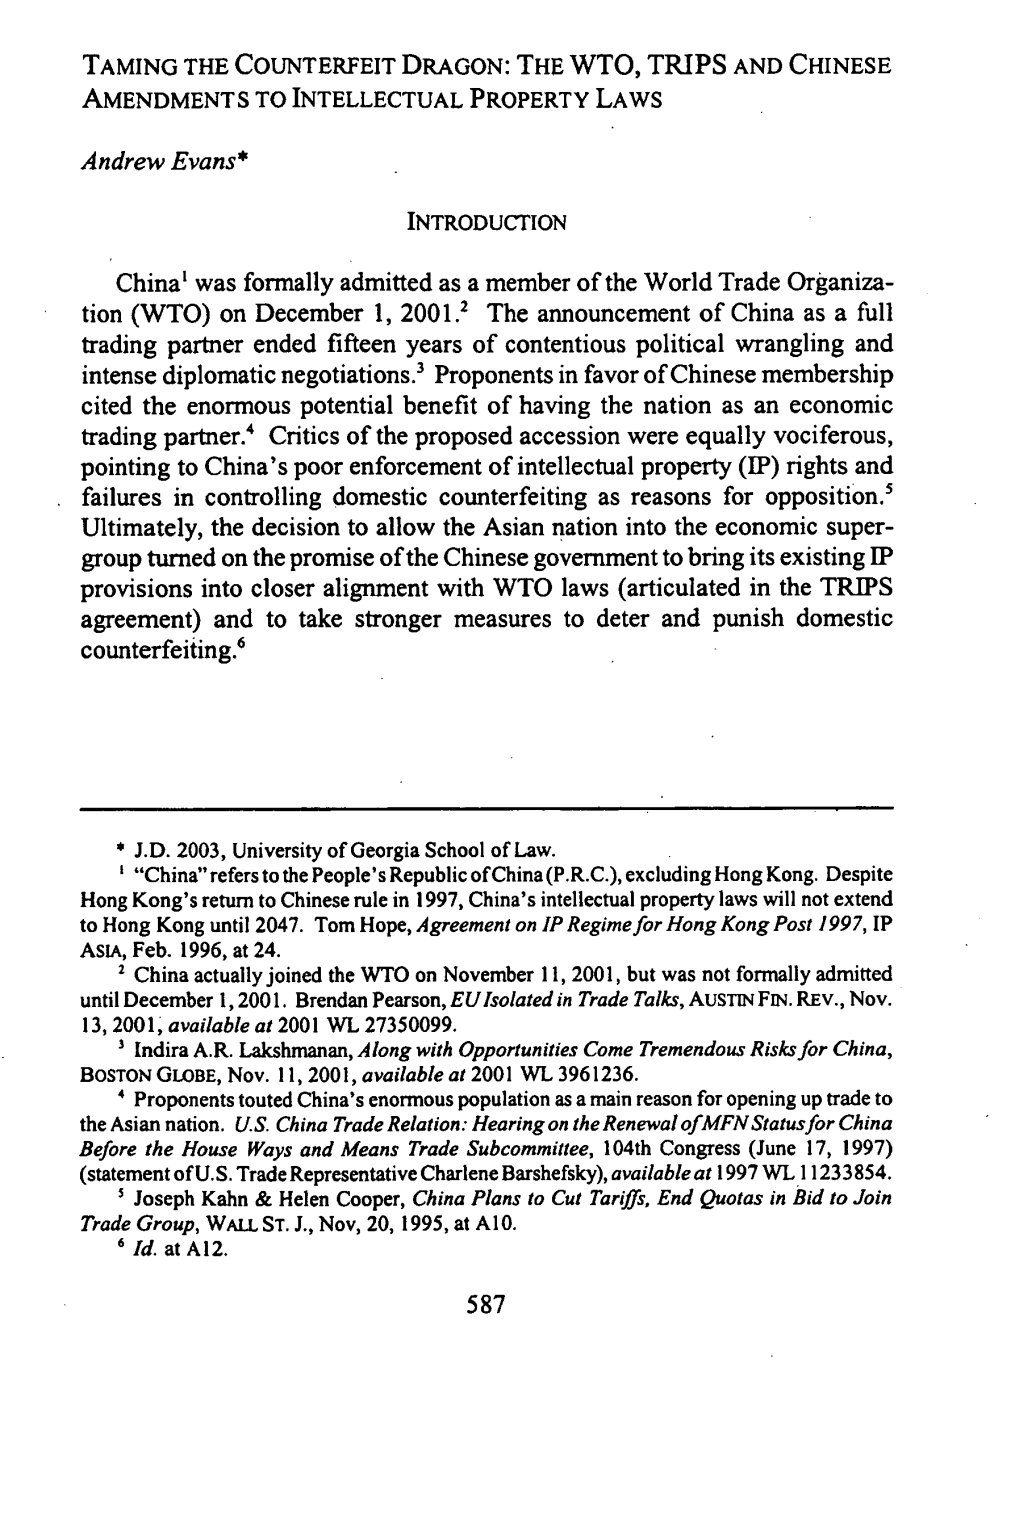 Taming the Counterfeit Dragon: the Wto, Trips and Chinese Amendments to Intellectual Property Laws